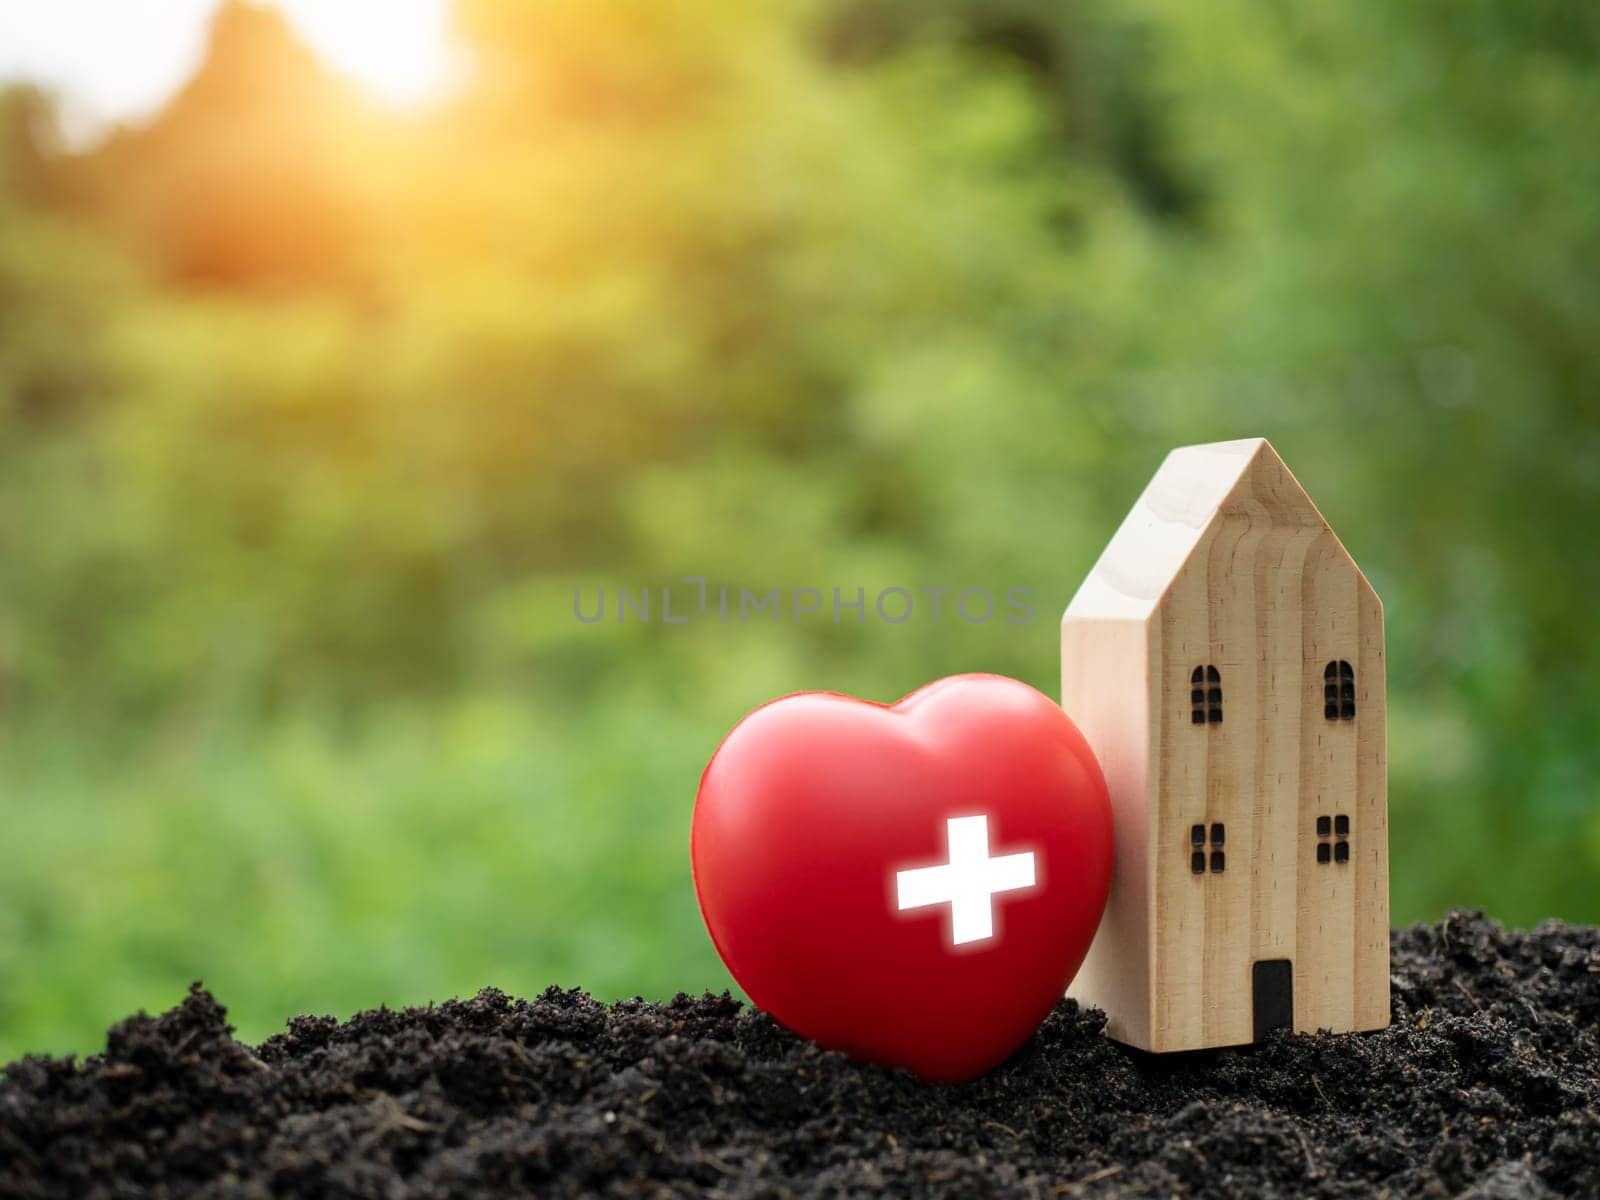 The concept of health insurance and medical welfare. Model wooden house and red heart with plus icon. Health insurance and access to health care. health care planning by Unimages2527